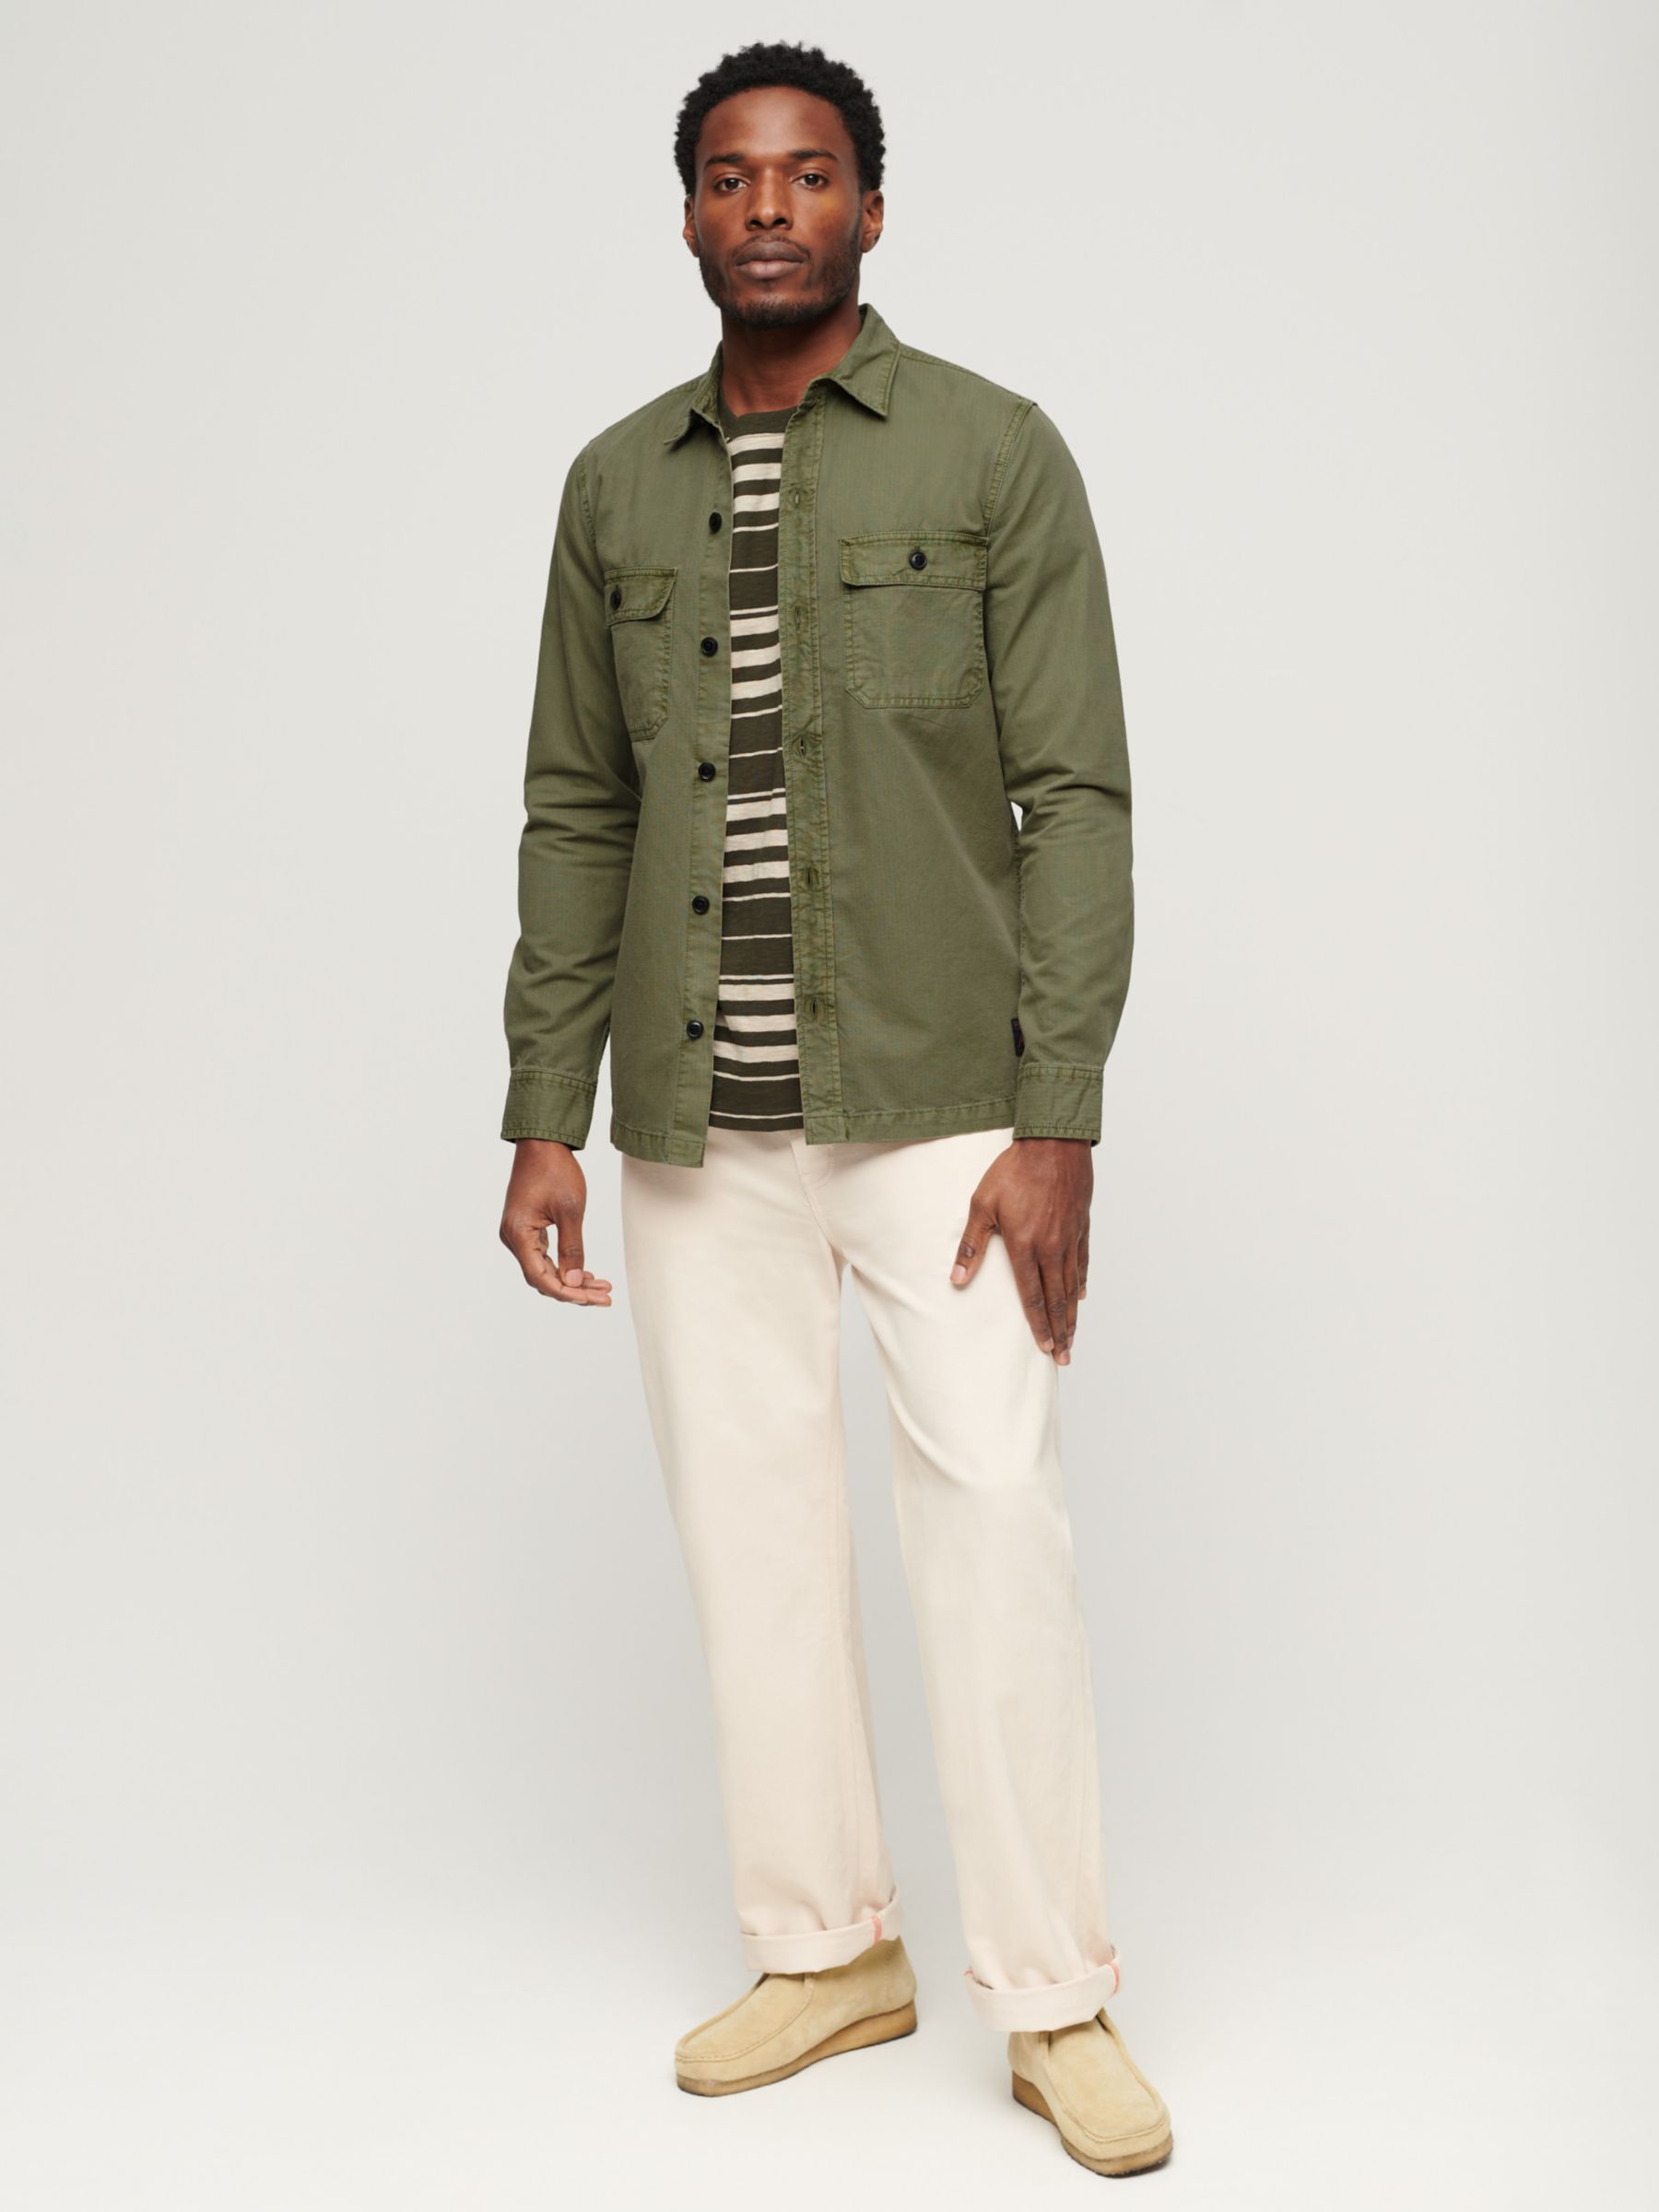 Buy Superdry Military Long Sleeve Shirt Online at johnlewis.com